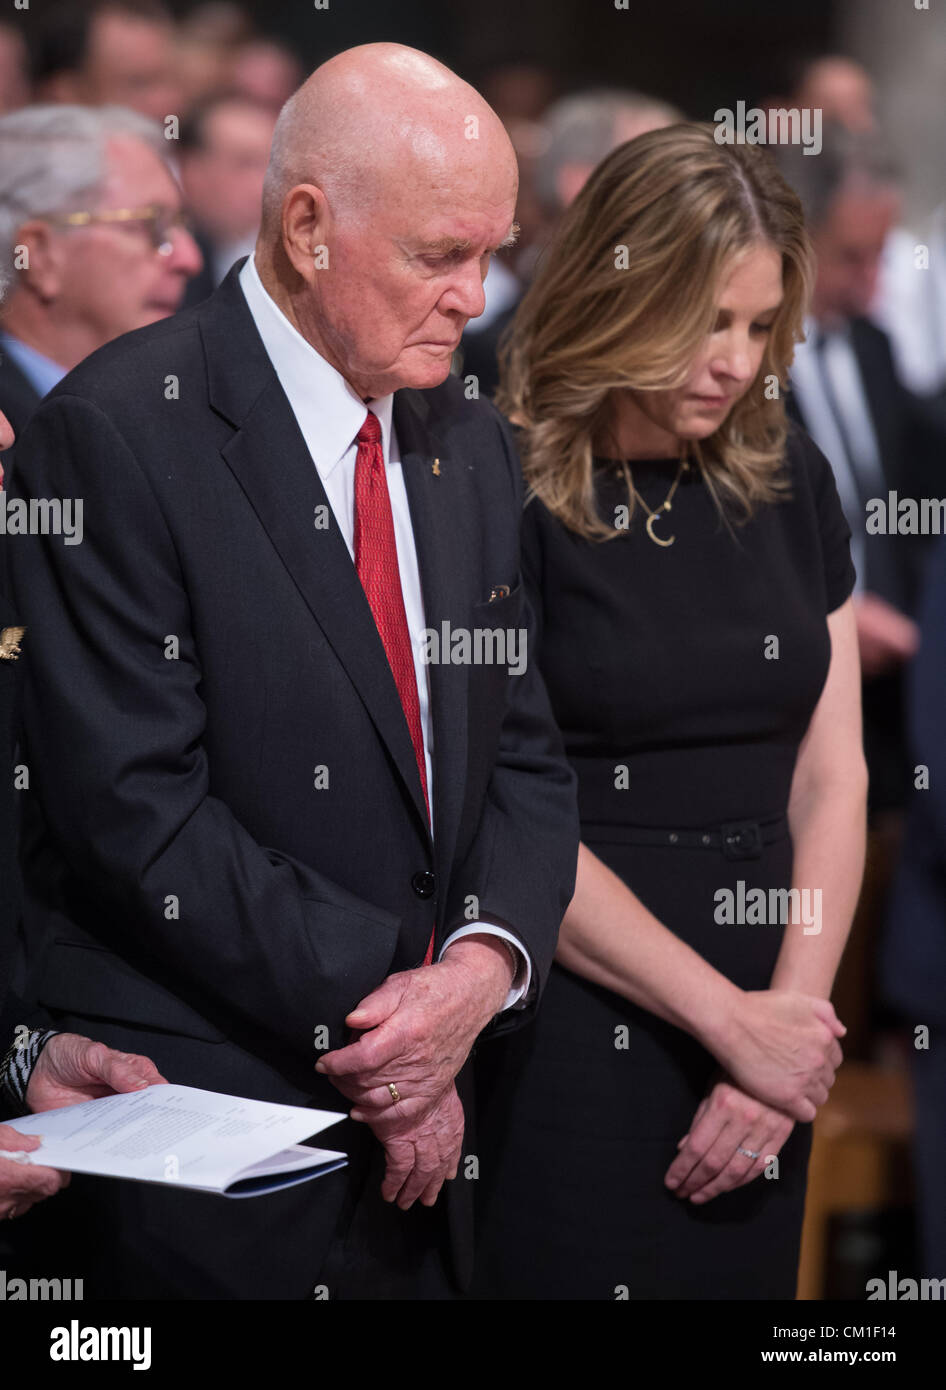 Former astronaut and US Senator John Glenn, left, and musician Diana Krall bow there heads in prayer during a memorial service celebrating the life of Neil Armstrong September 13, 2012 at the National Cathedral in Washington, DC. Armstrong, the first man to walk on the moon during the 1969 Apollo 11 mission, died August 25. He was 82. Stock Photo